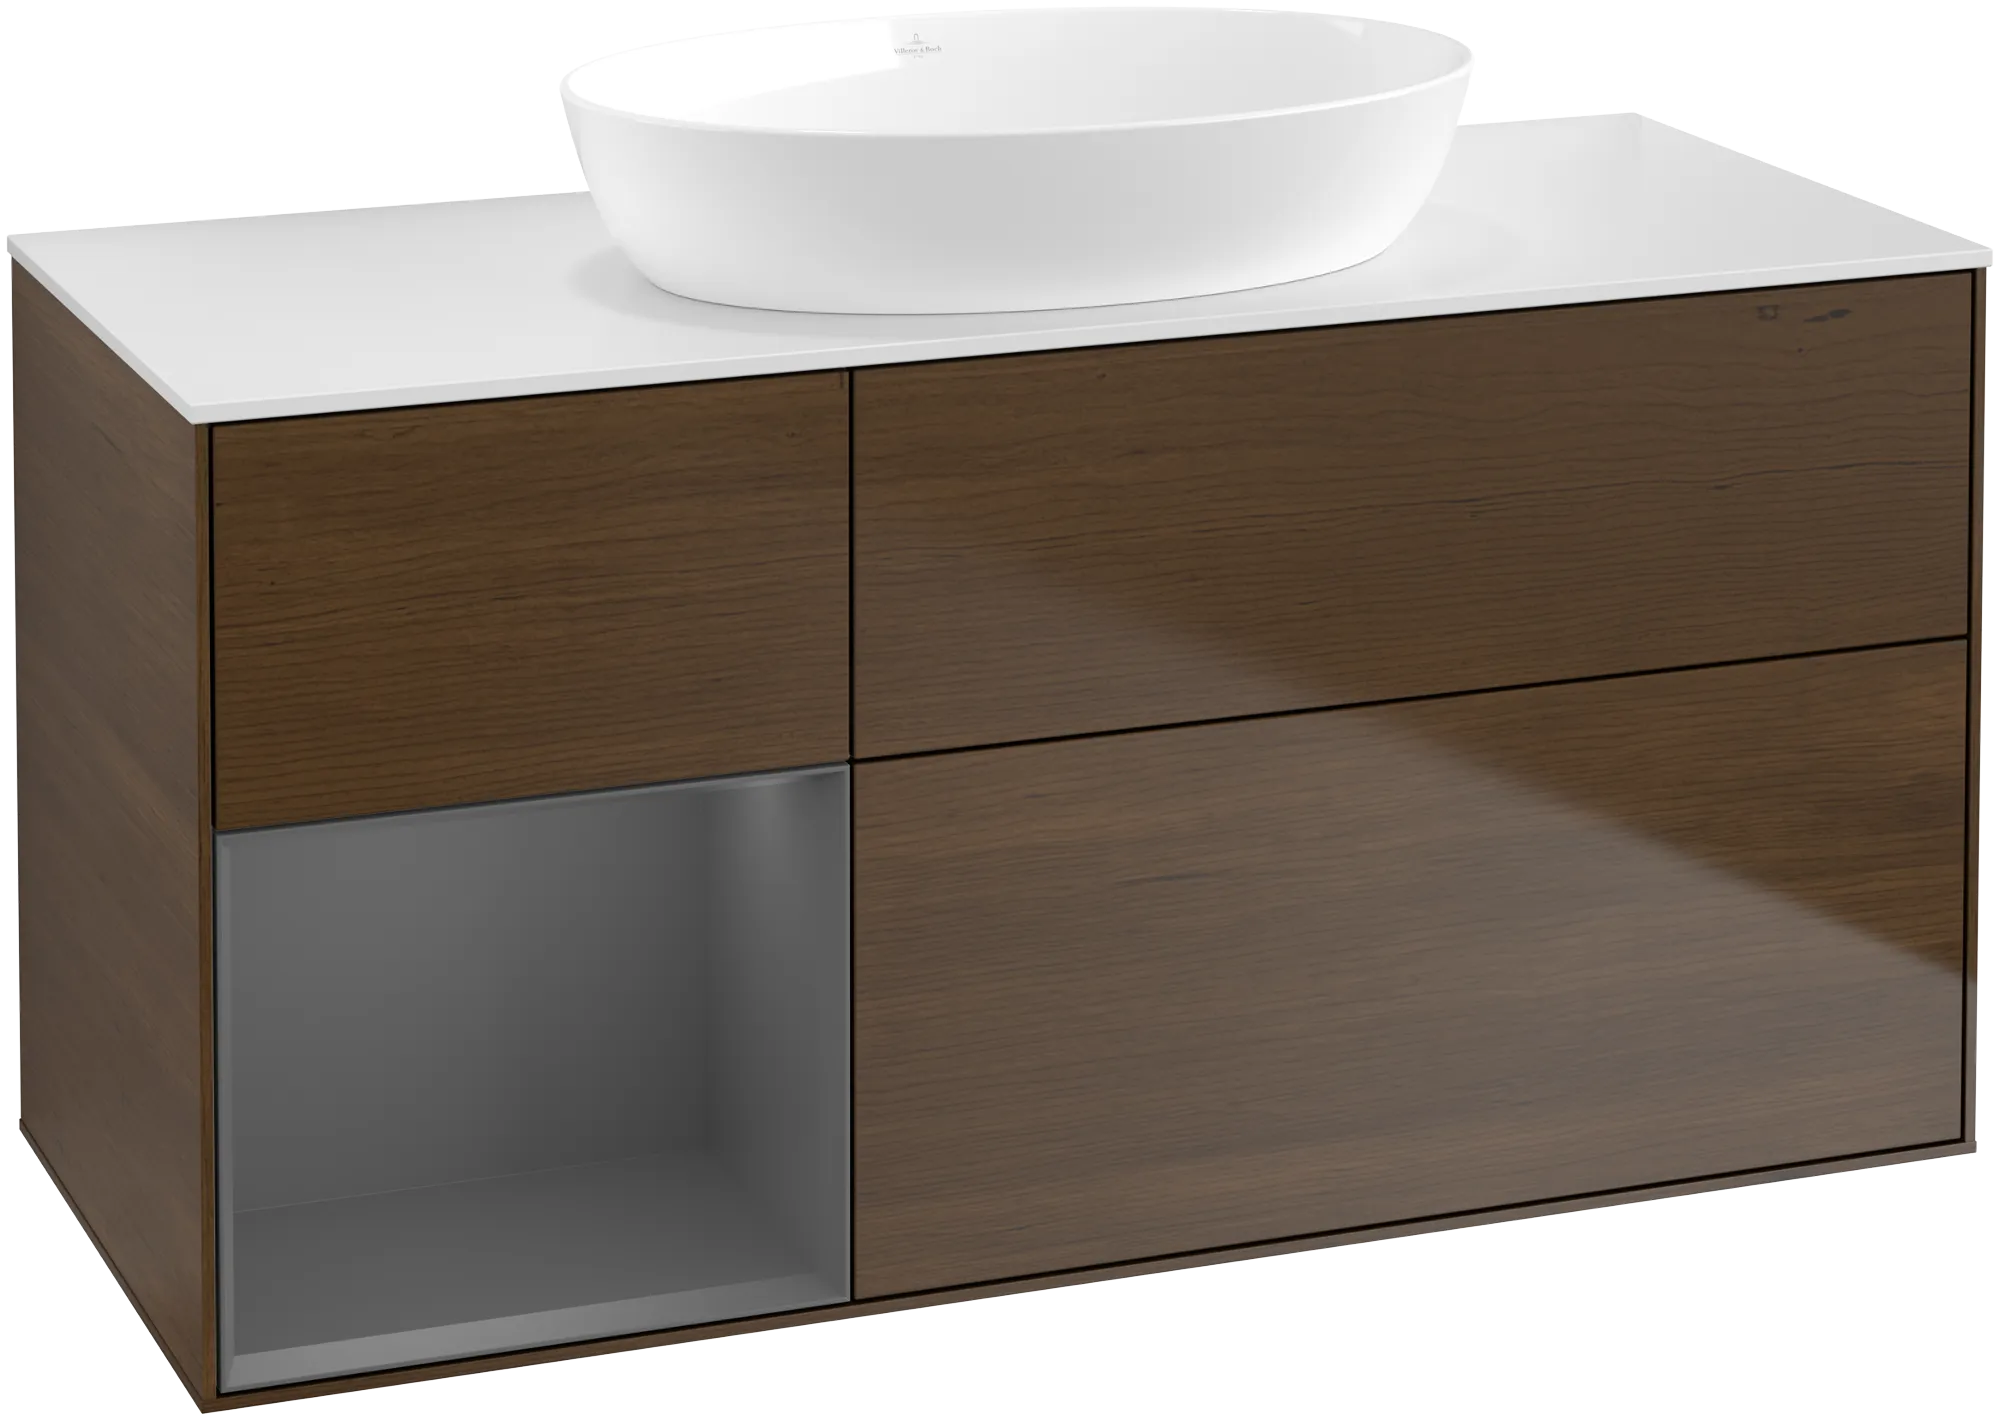 VILLEROY BOCH Finion Vanity unit, with lighting, 3 pull-out compartments, 1200 x 603 x 501 mm, Walnut Veneer / Anthracite Matt Lacquer / Glass White Matt #FA61GKGN resmi